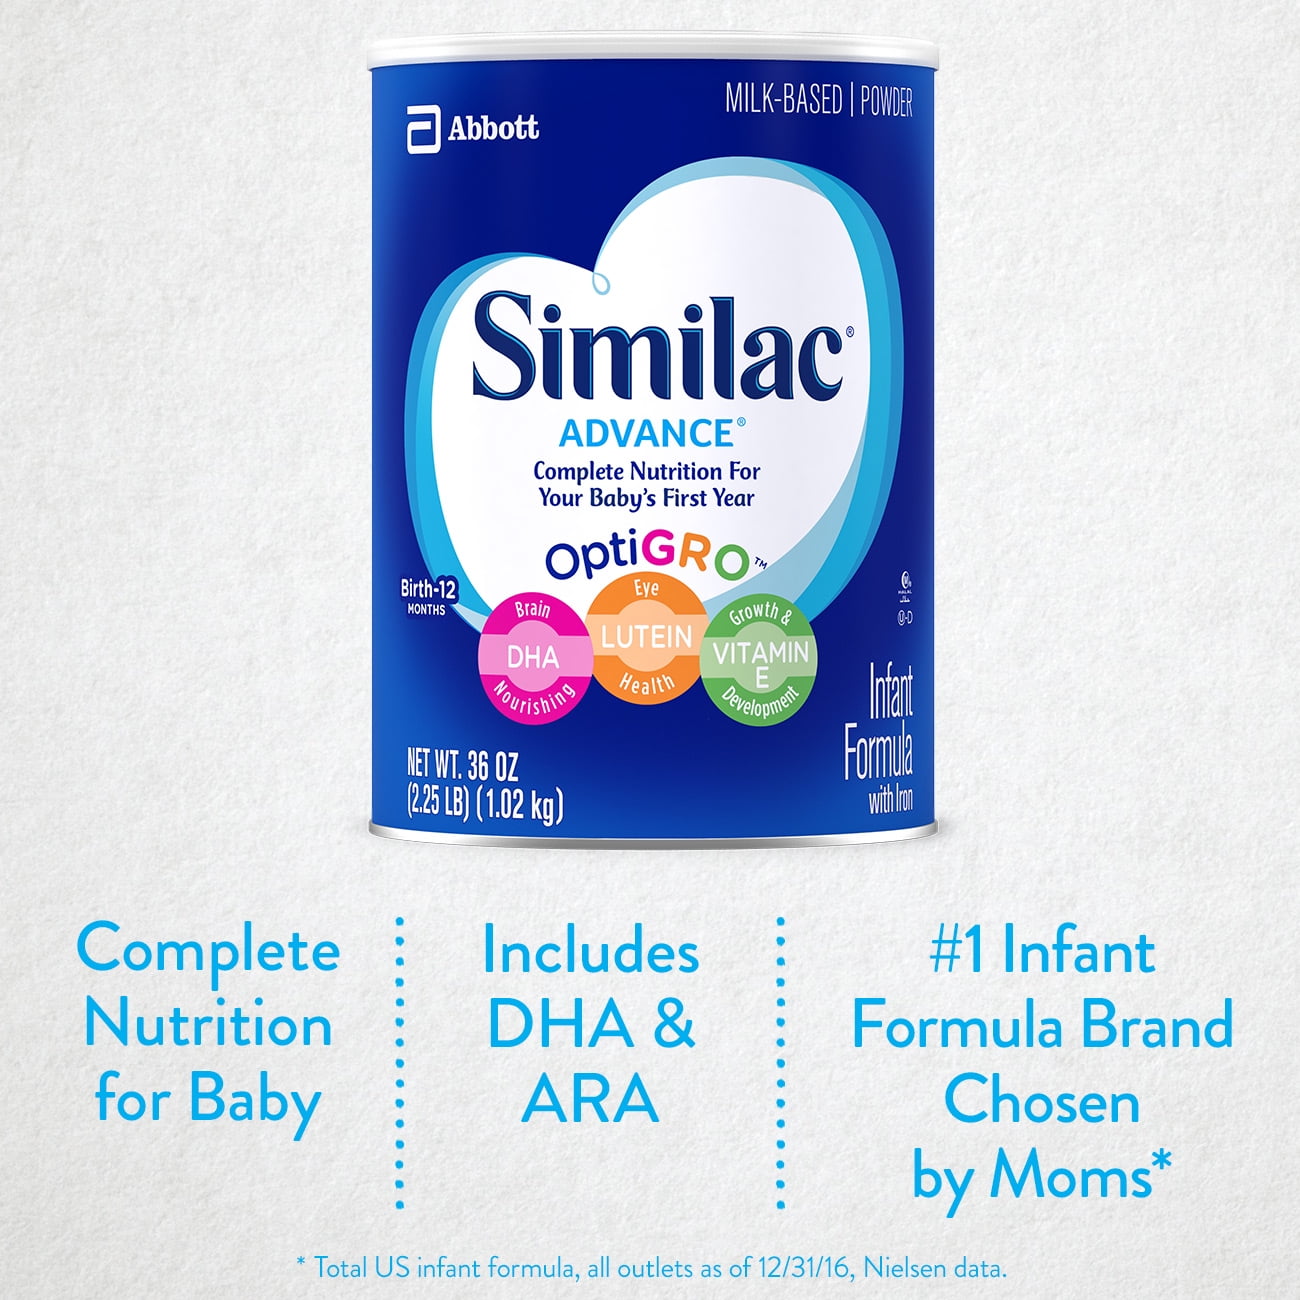 similac advance step 1 concentrated liquid baby formula